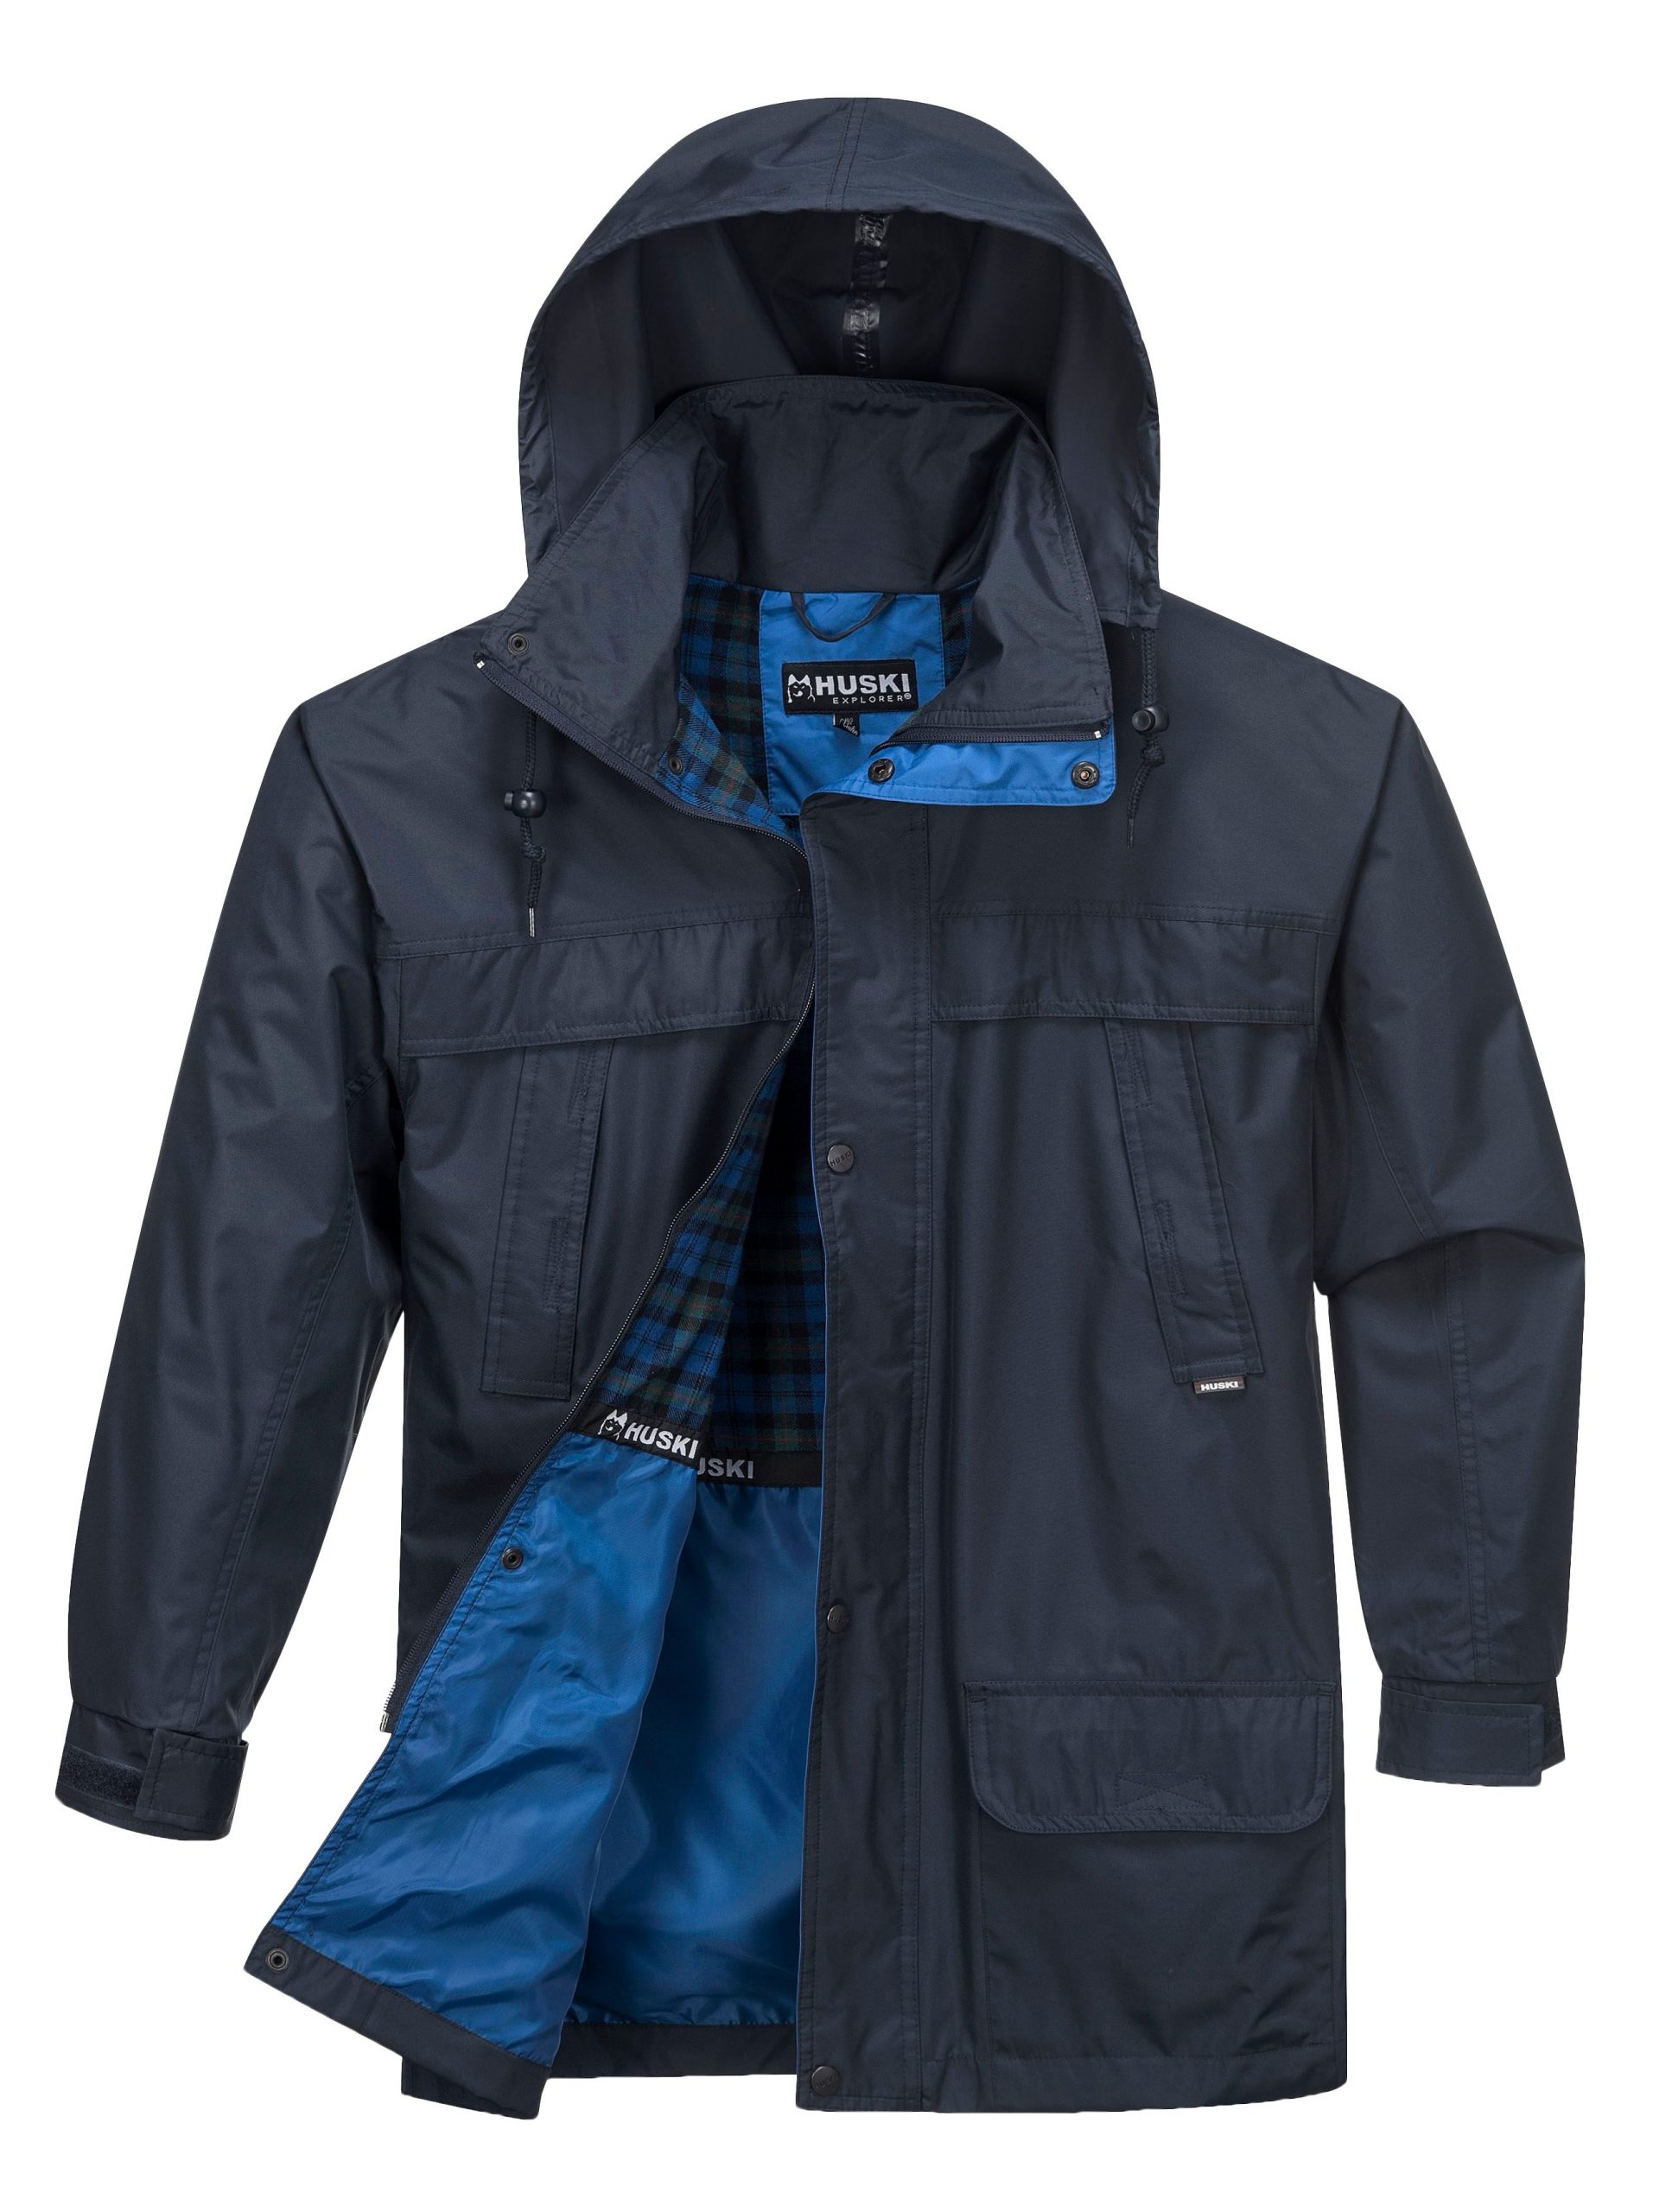 HUSKI CLASSIC JACKET with storm proof collar and cuffs